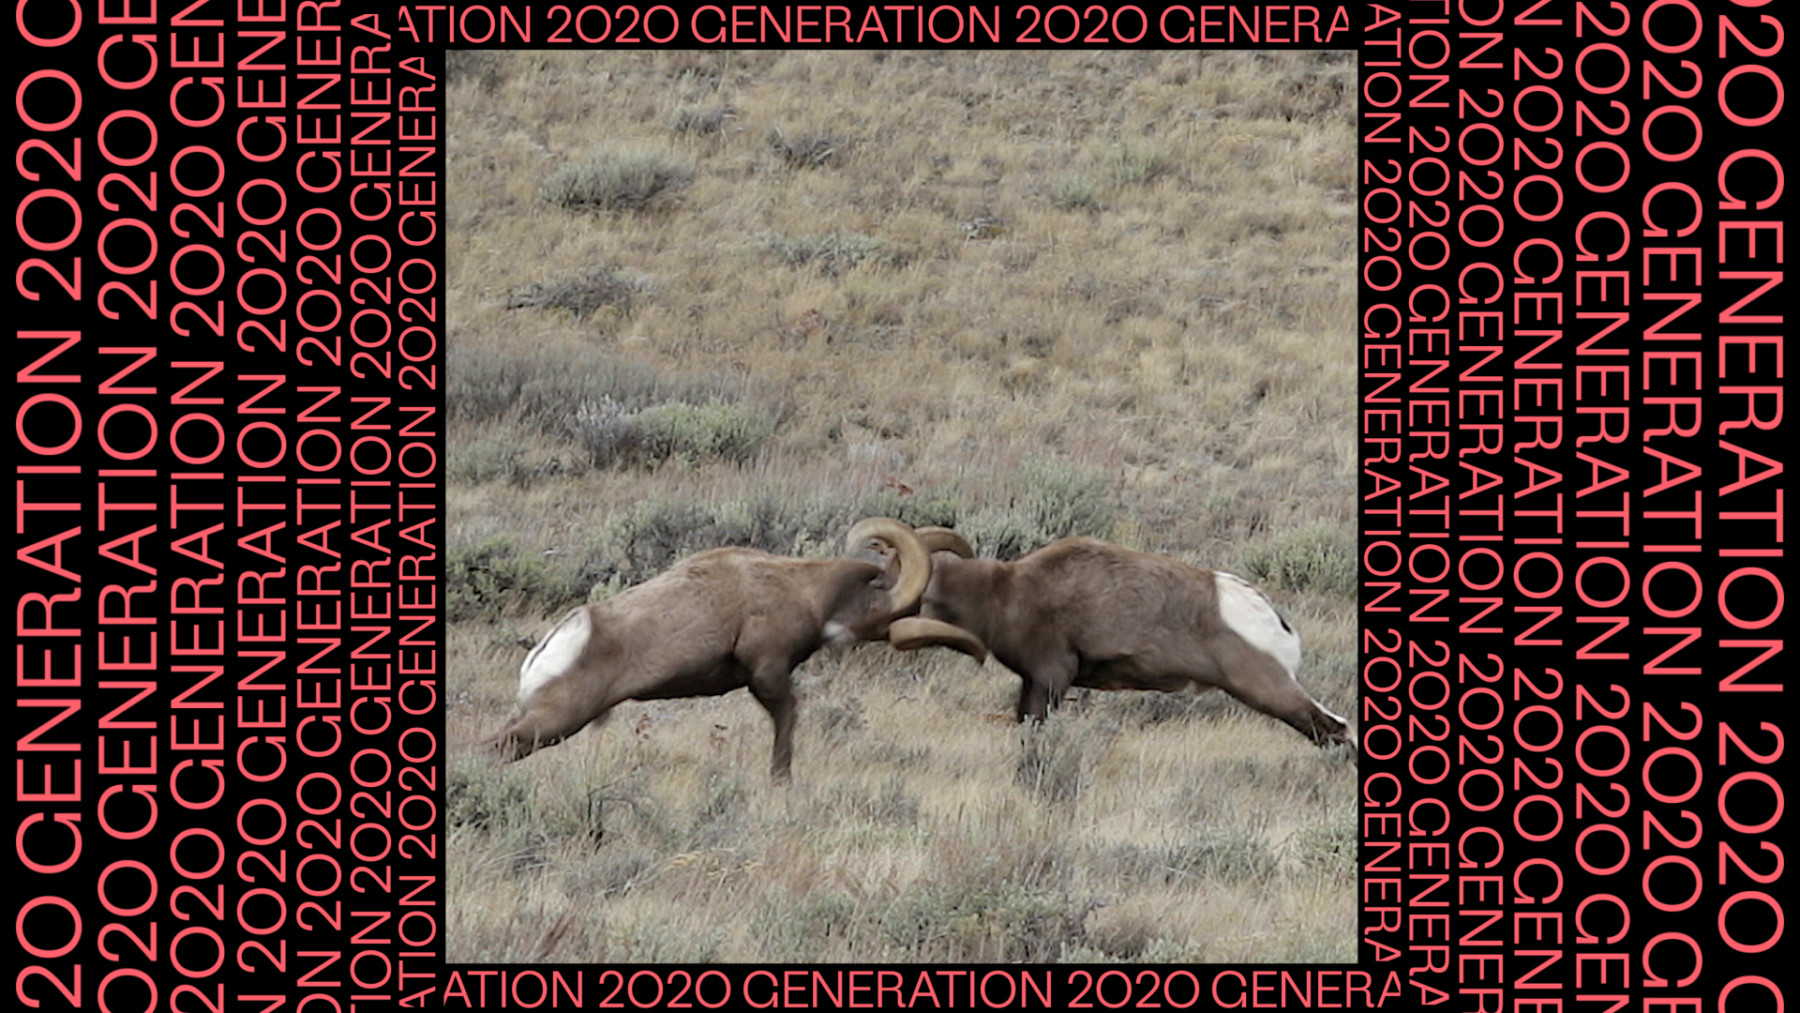 Two rams fighting each other. The rest of the frame is filled with the text Generation 2020, repeated over and over.